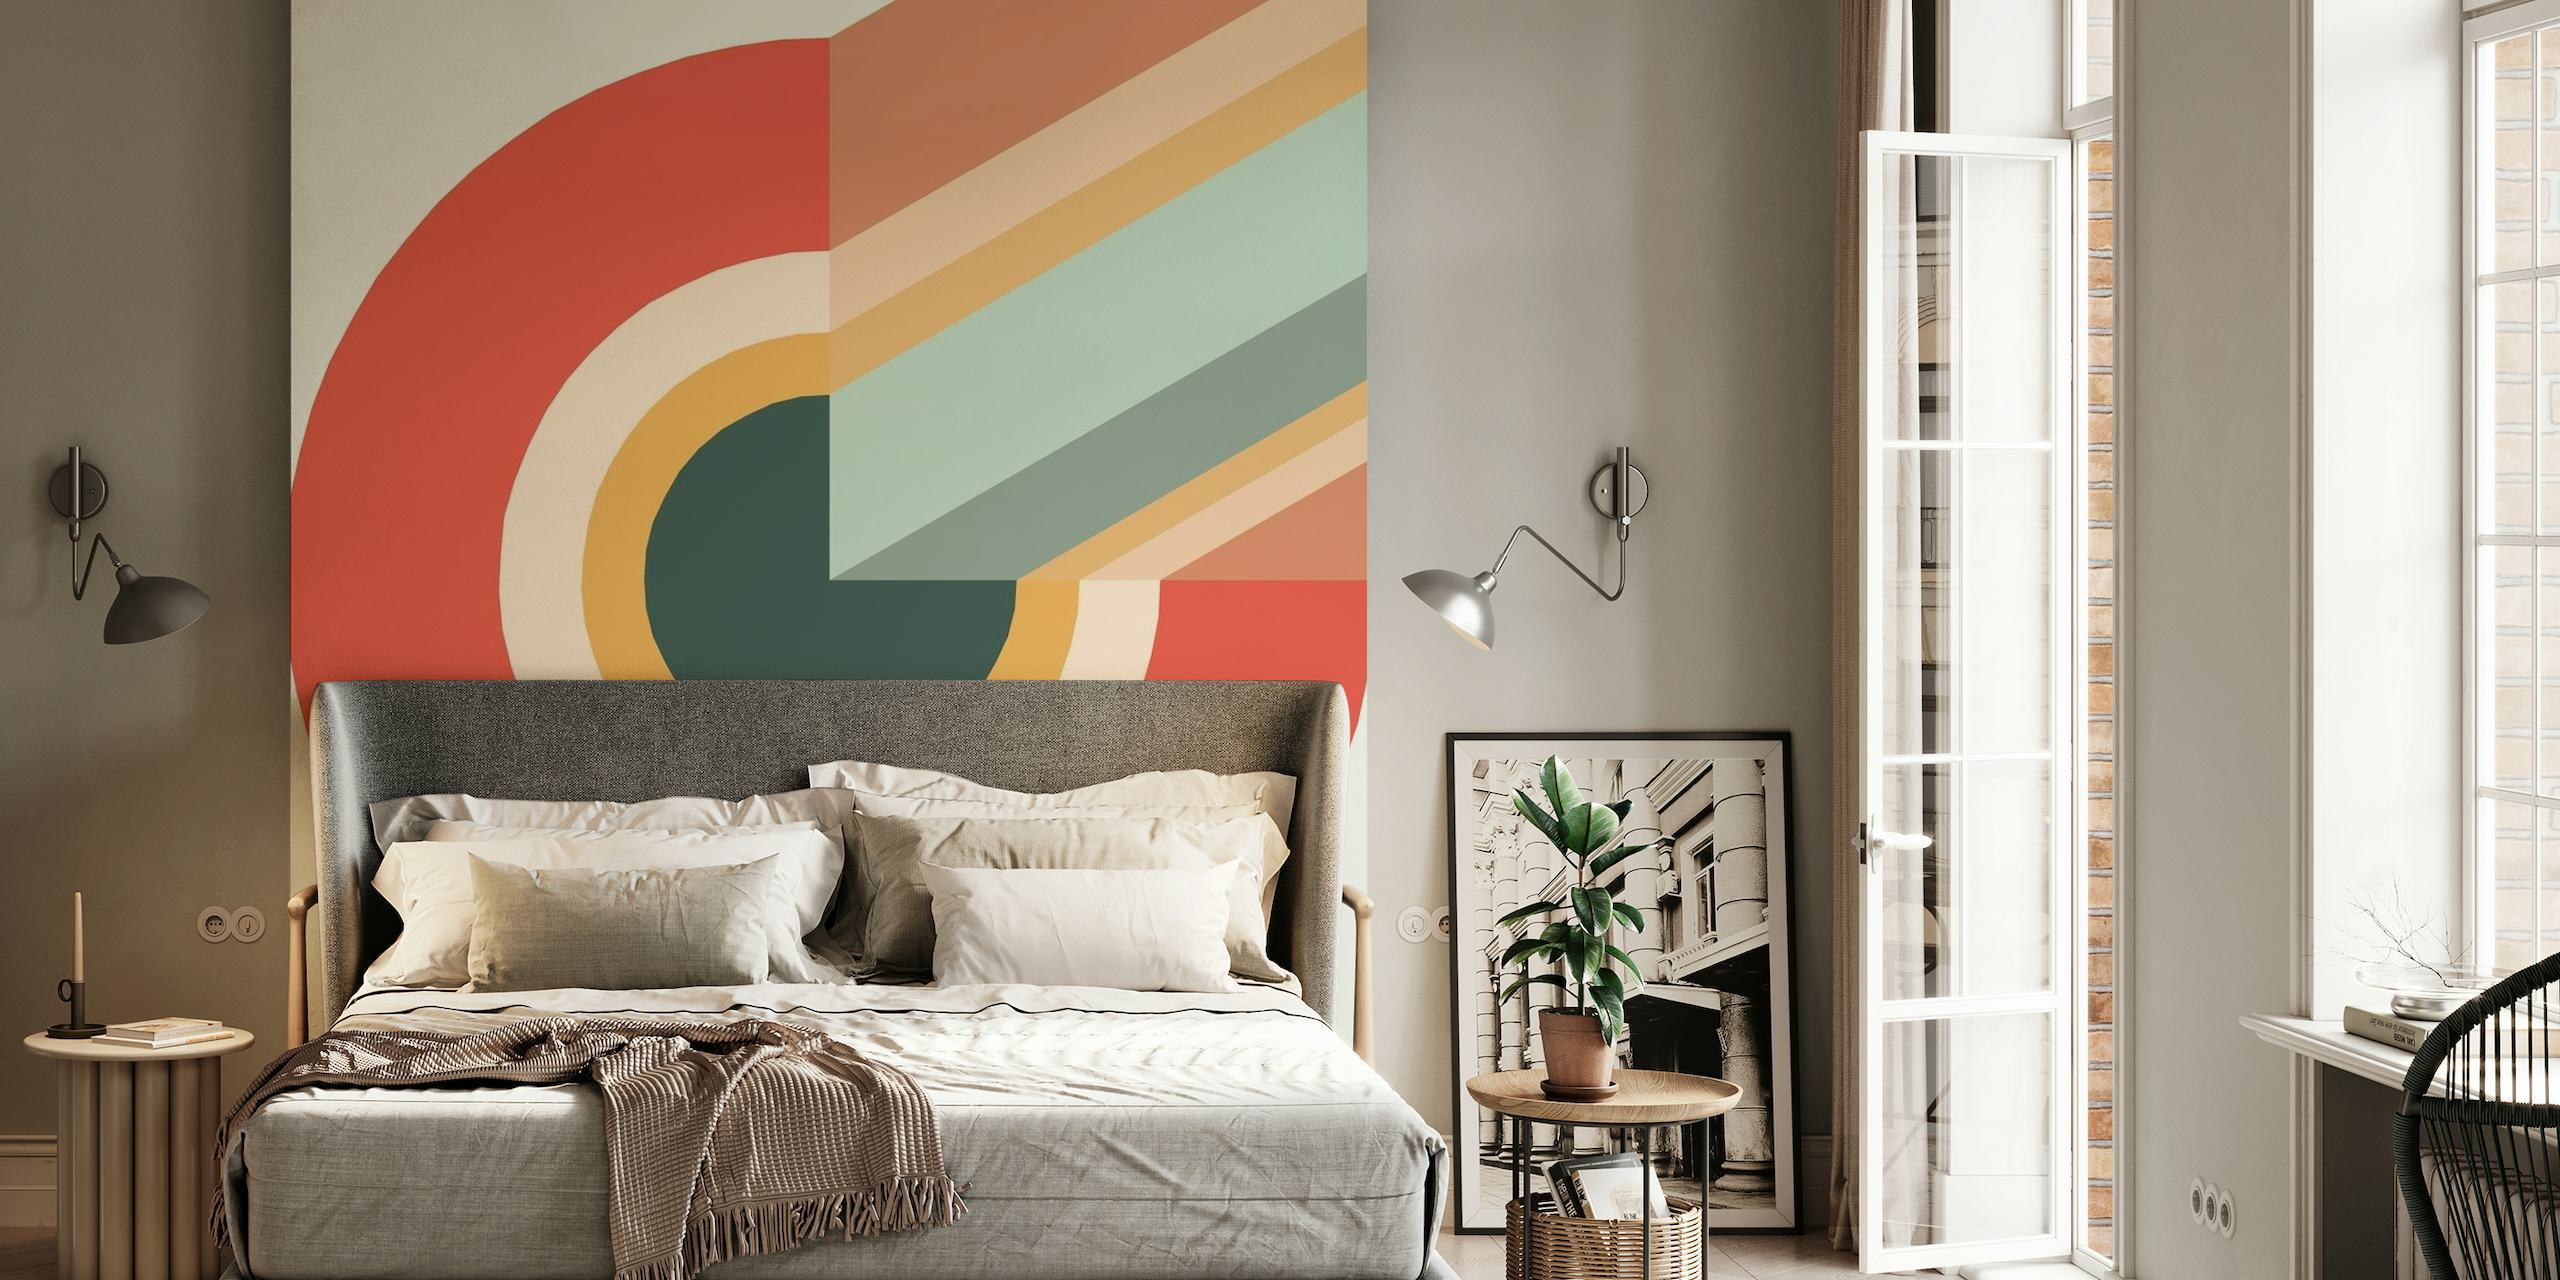 Abstract swirl wall mural with harmonious blend of warm and cool colors